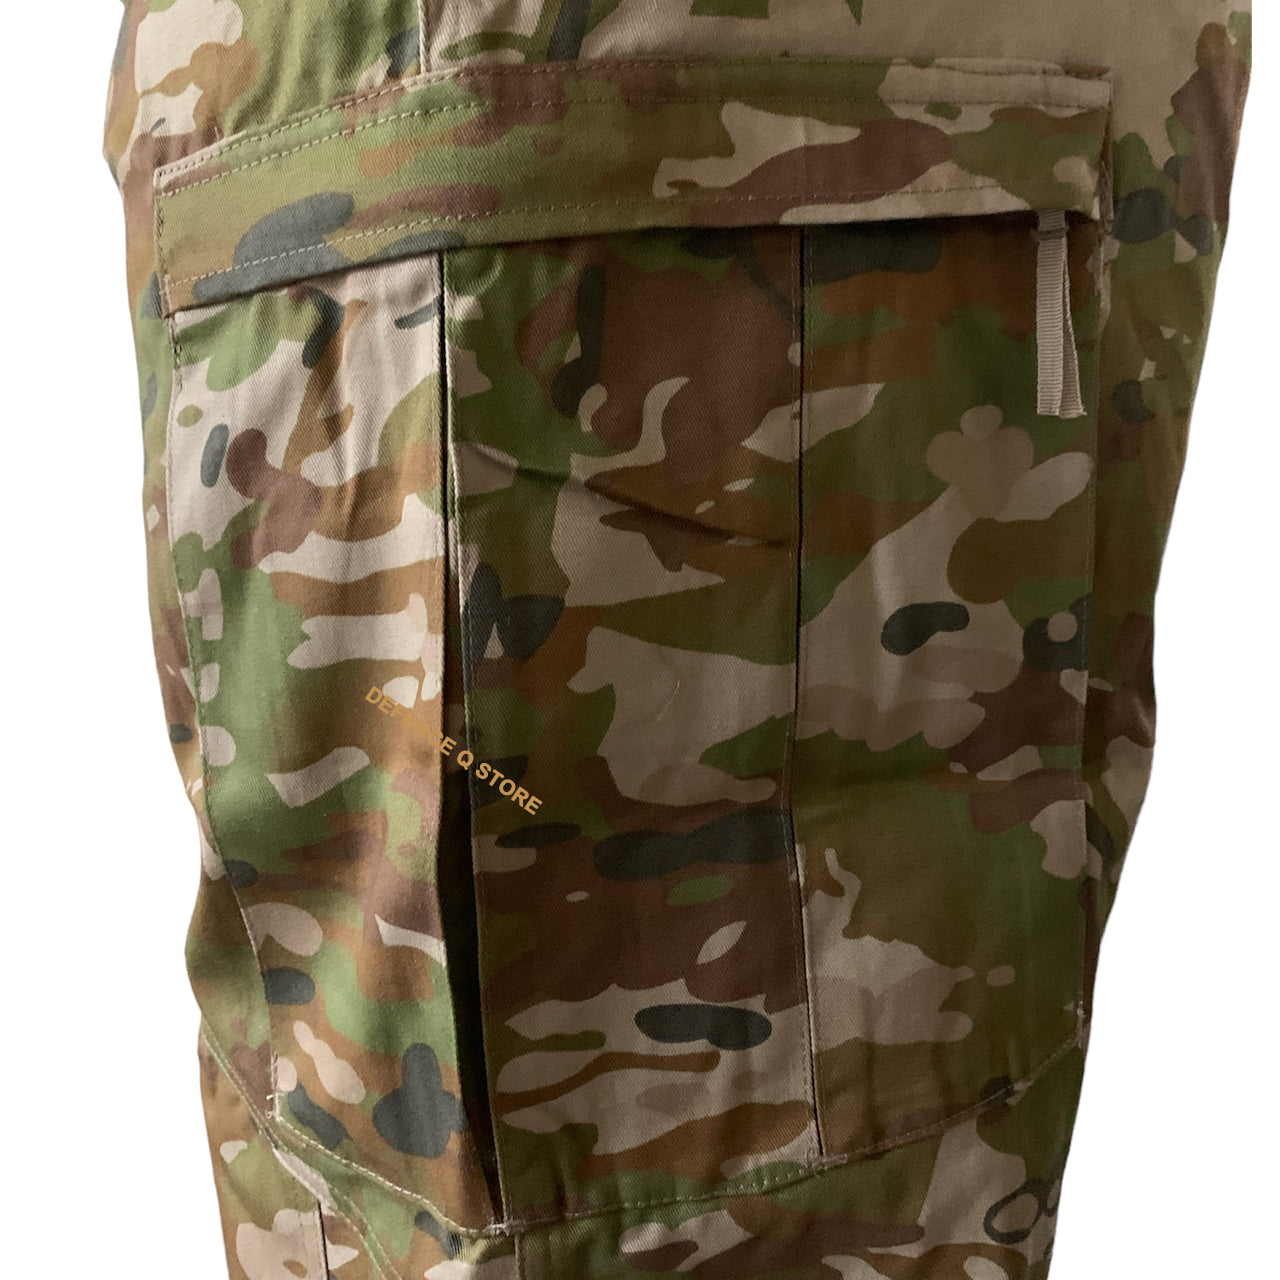 The Army Tactical Trousers AMCU are designed with AMC compatible military pattern, featuring cargo pockets with zips on the legs, an adjustable waist with wide belt loops, and elastic trouser ties with a toggle at the ankles. The groin area is made of elastic material for added comfort and movability, while padding through the waistband maintains a similar design to standard military trousers. Made with 100% cotton, the trousers come in a stylish AMC color. www.defenceqstore.com.au